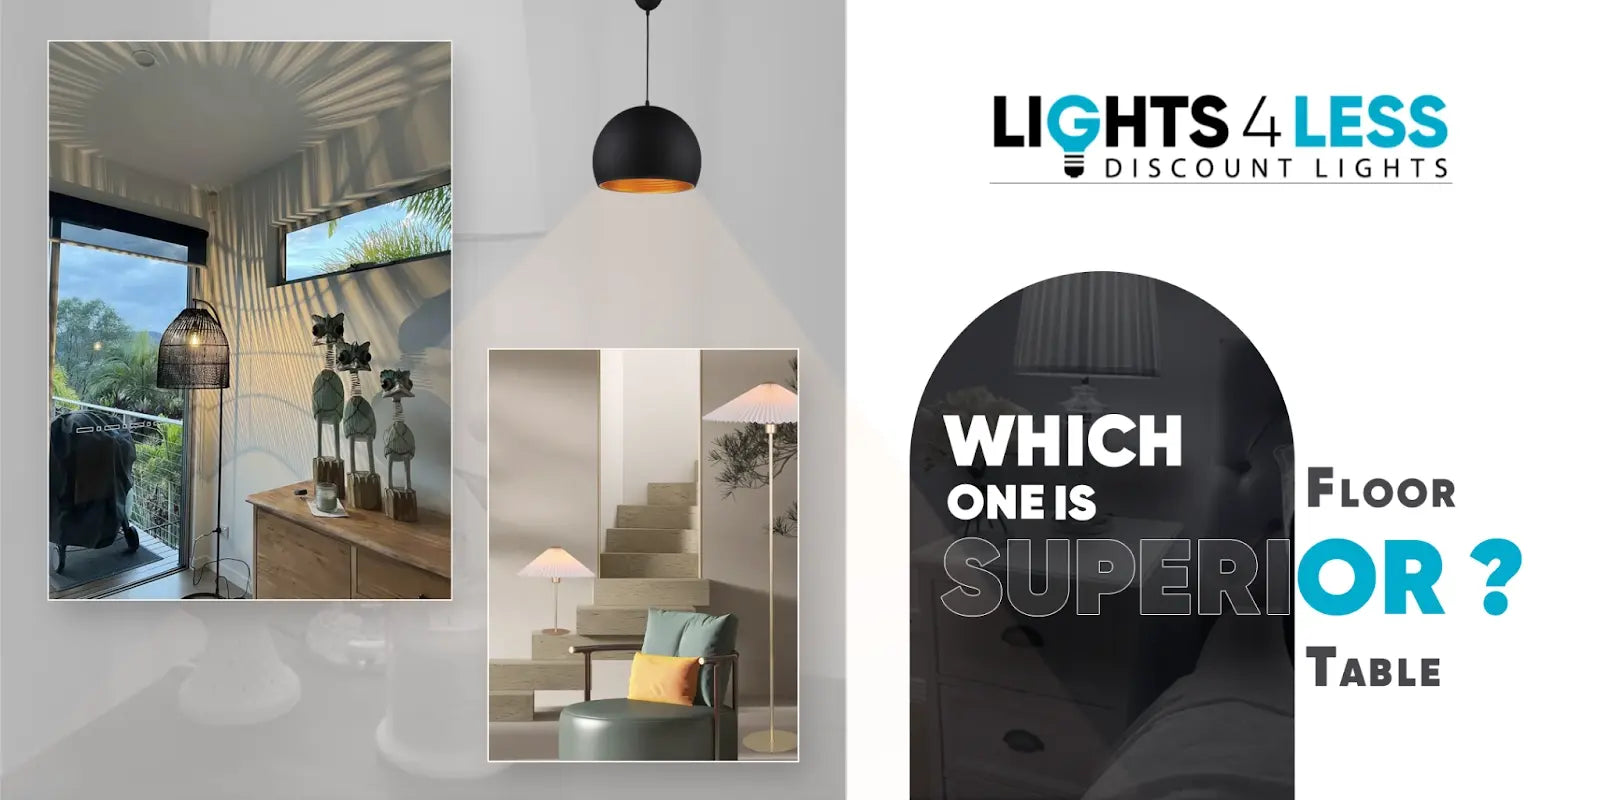 Floor Lamps vs Table Lamps: Which One Is Better?